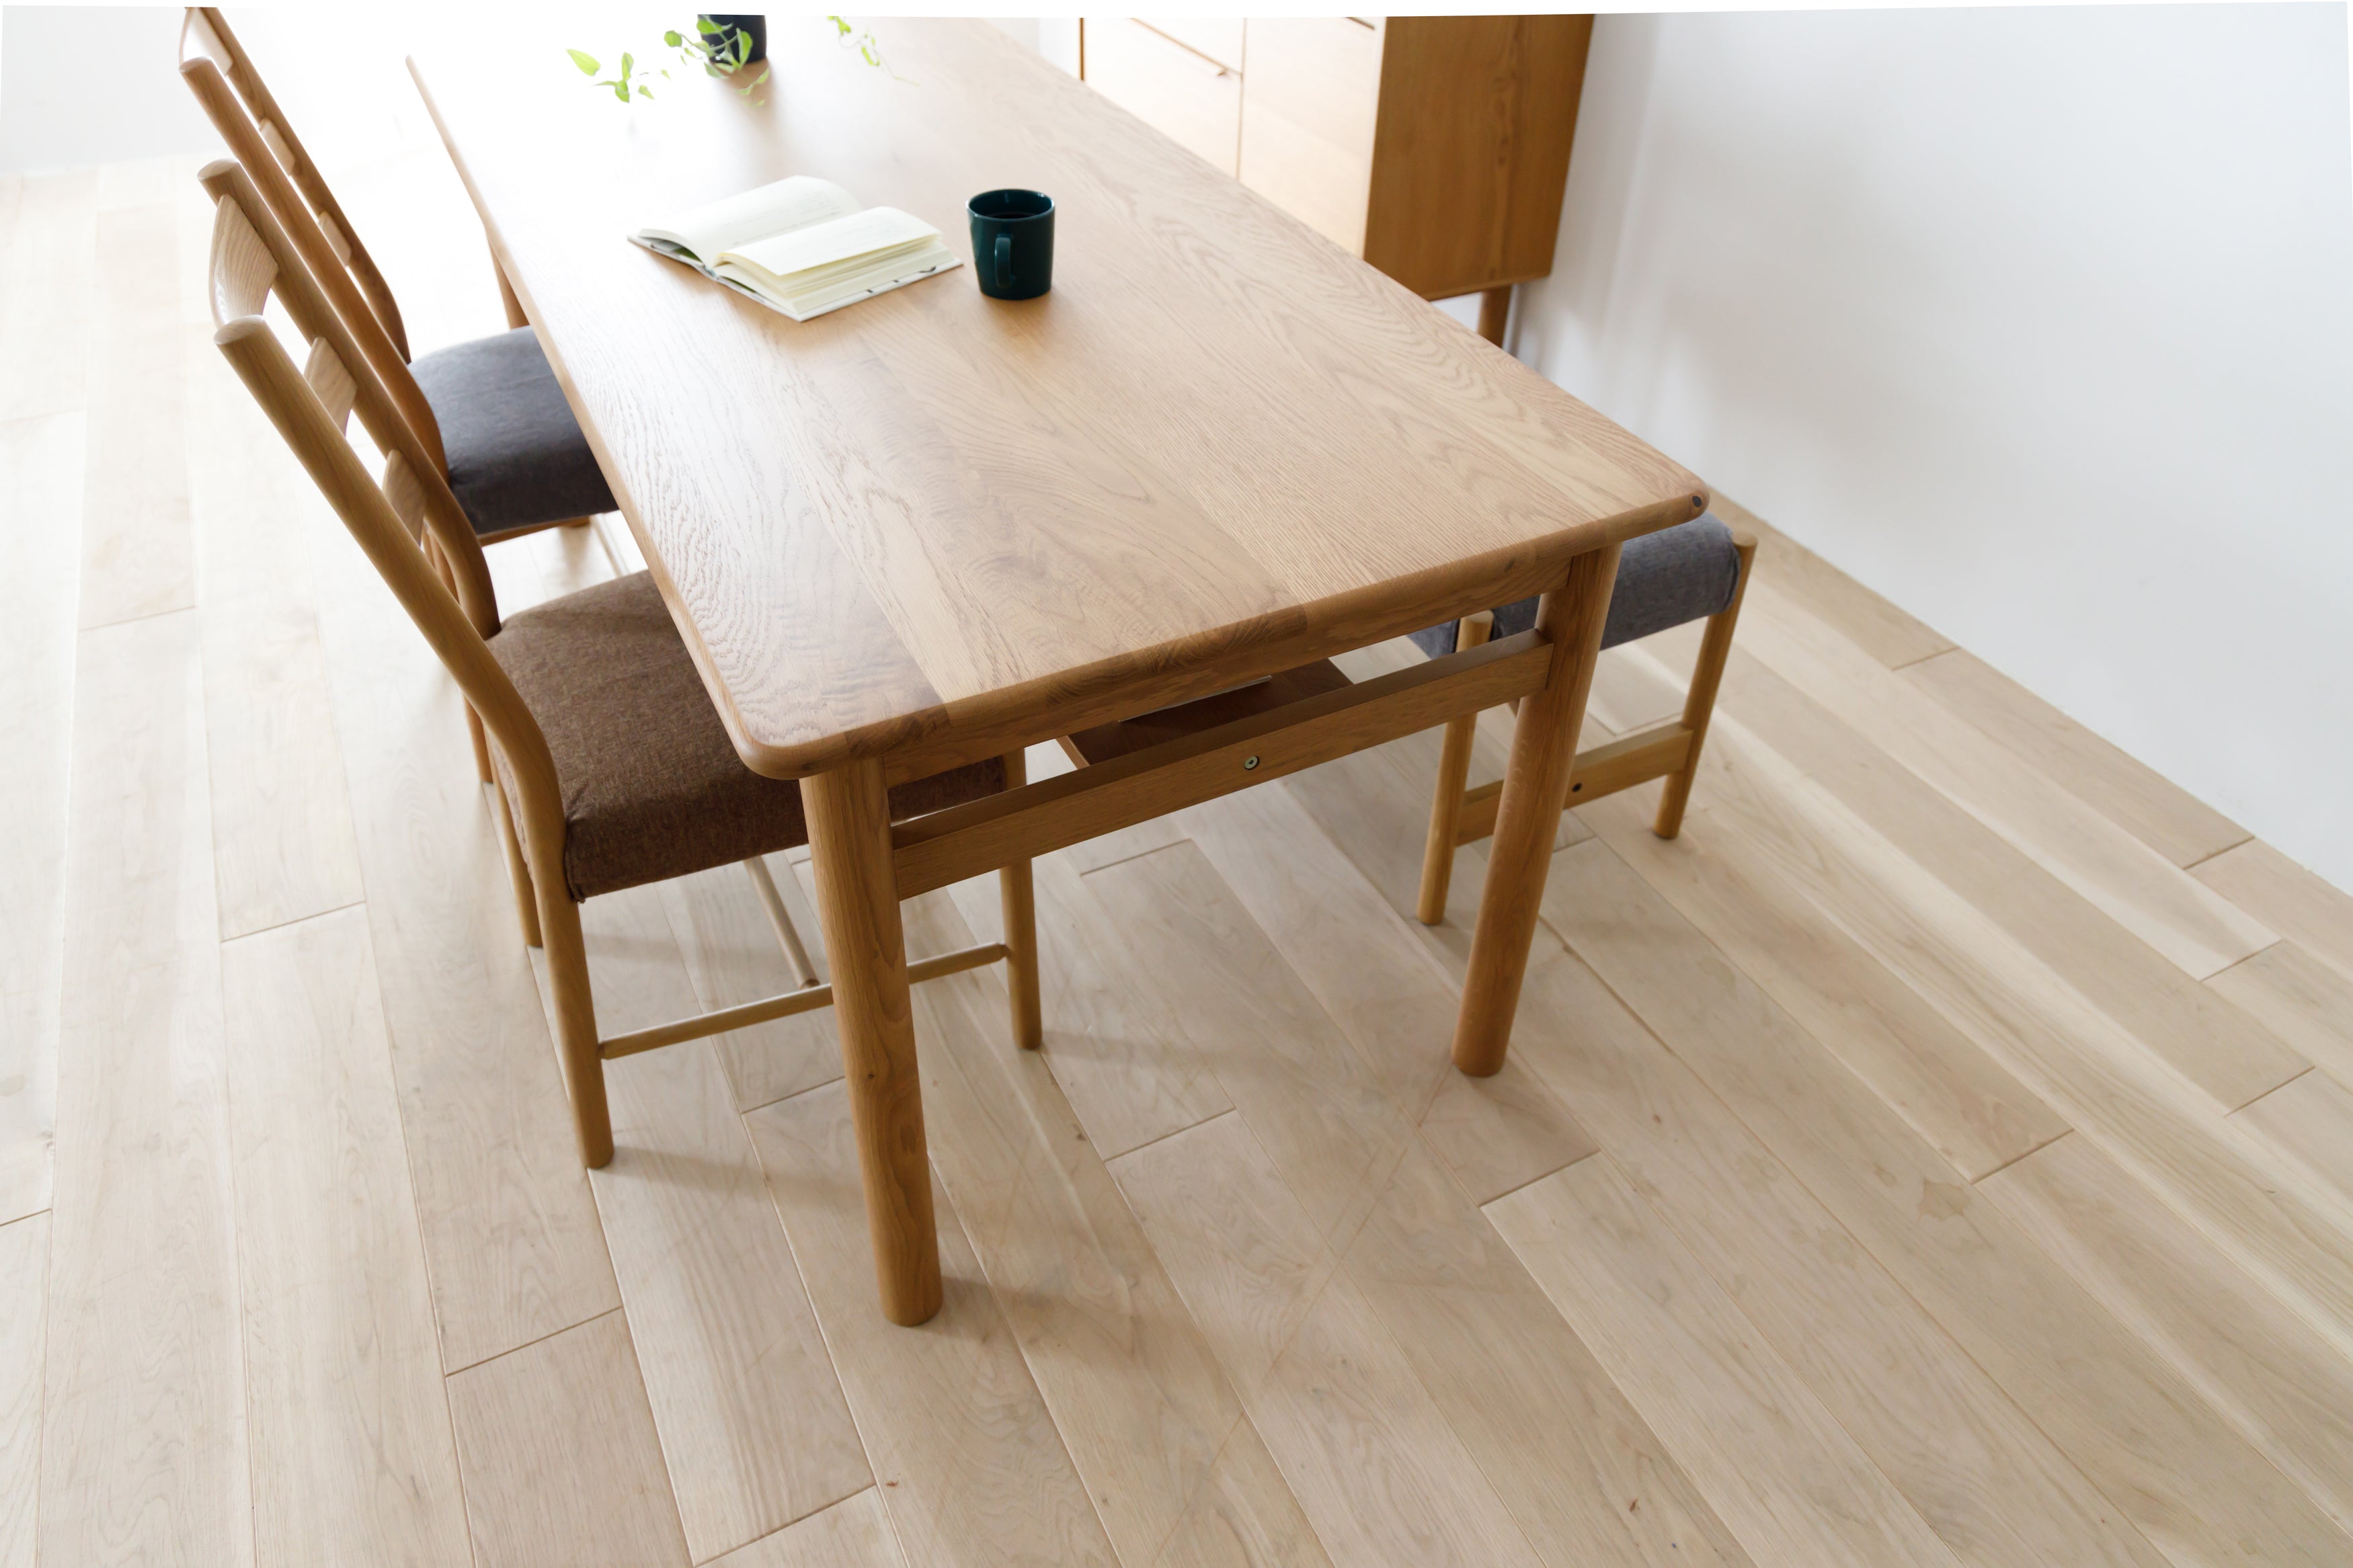 SALA - New Dining Table